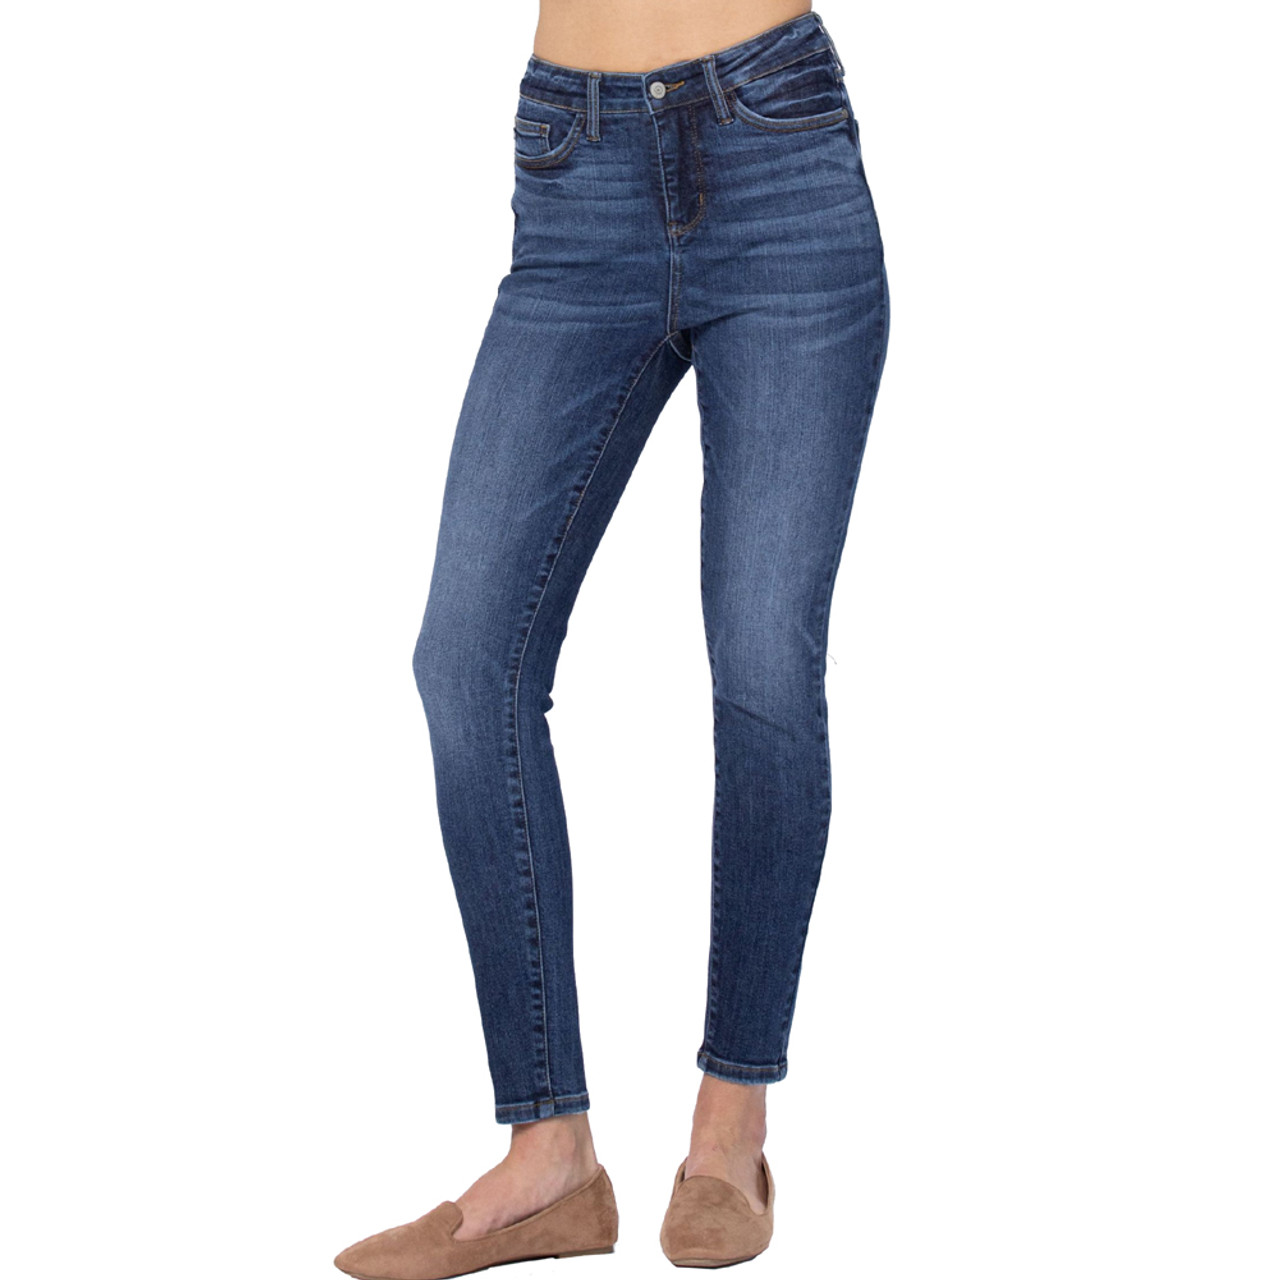 JUDY BLUE TUMMY CONTROL TOP JEANS